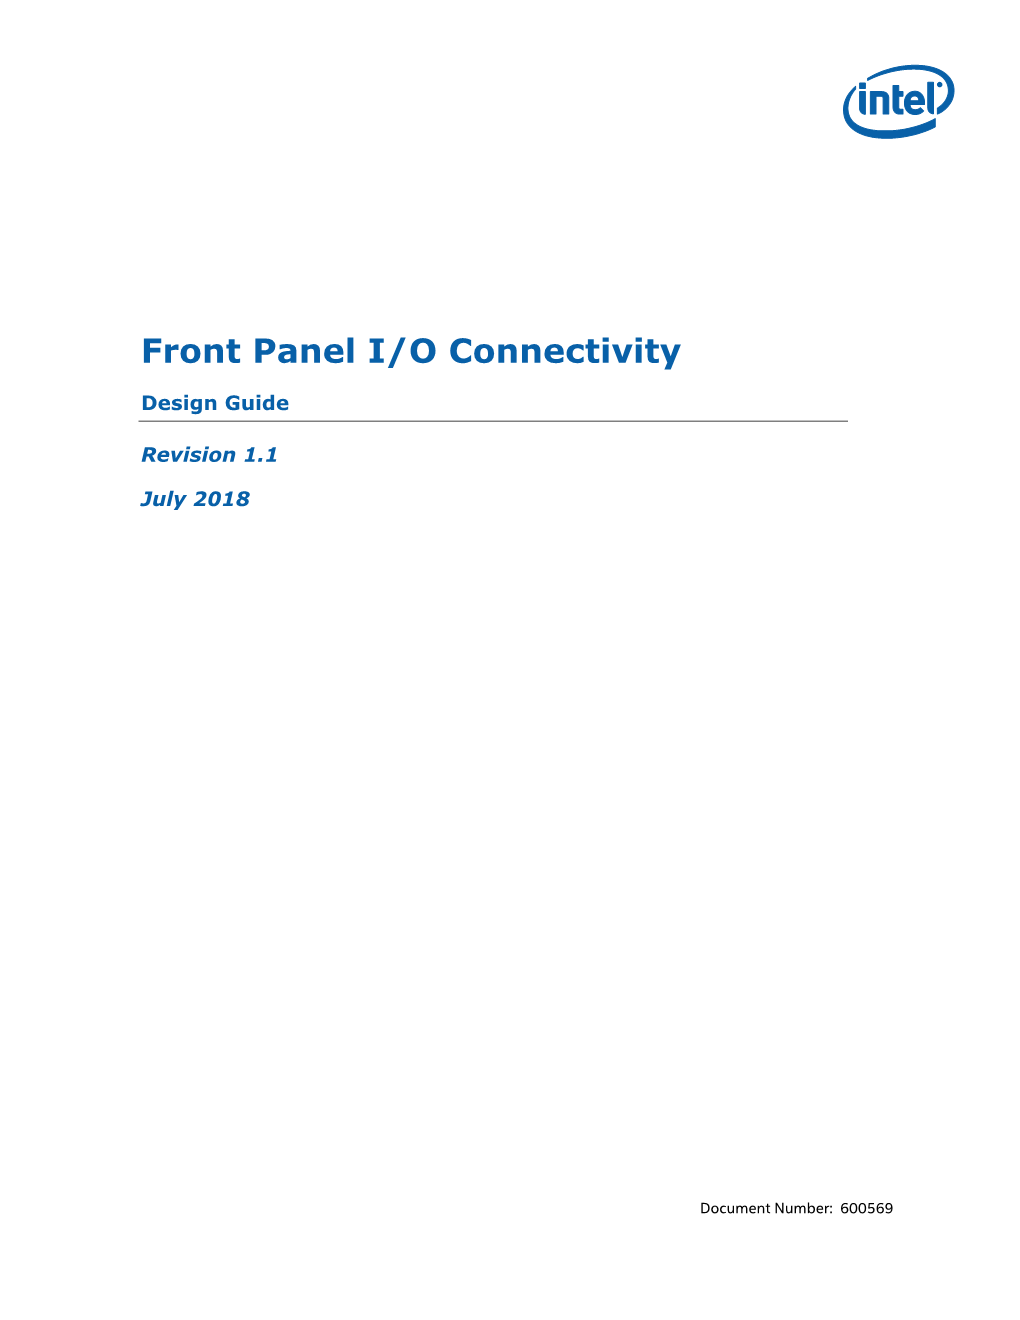 Front Panel I/O Connectivity Design Guide